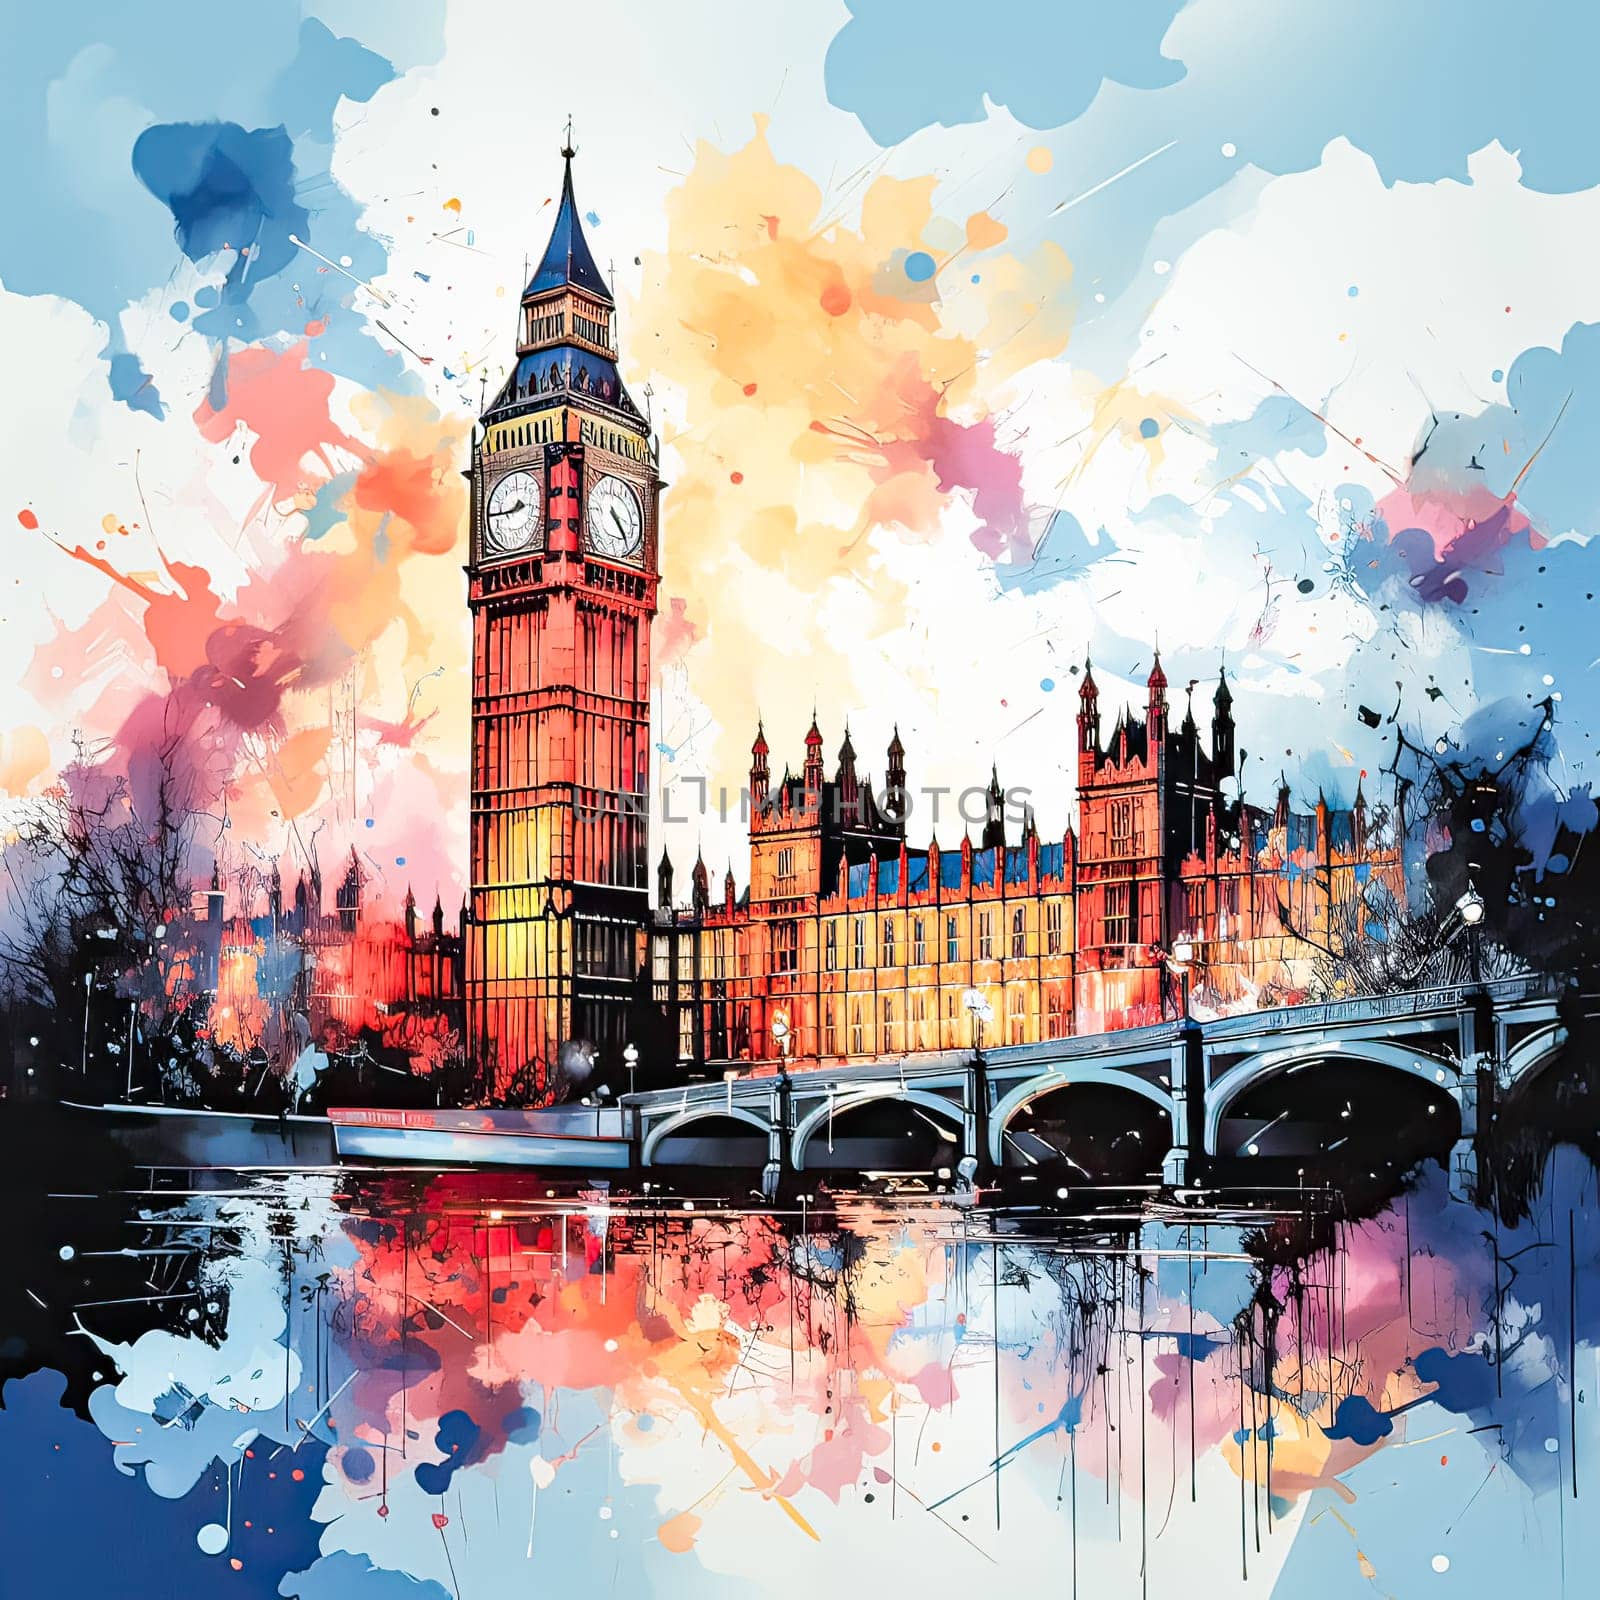 Sunsets embrace in watercolor Big Ben stands tall by Alla_Morozova93